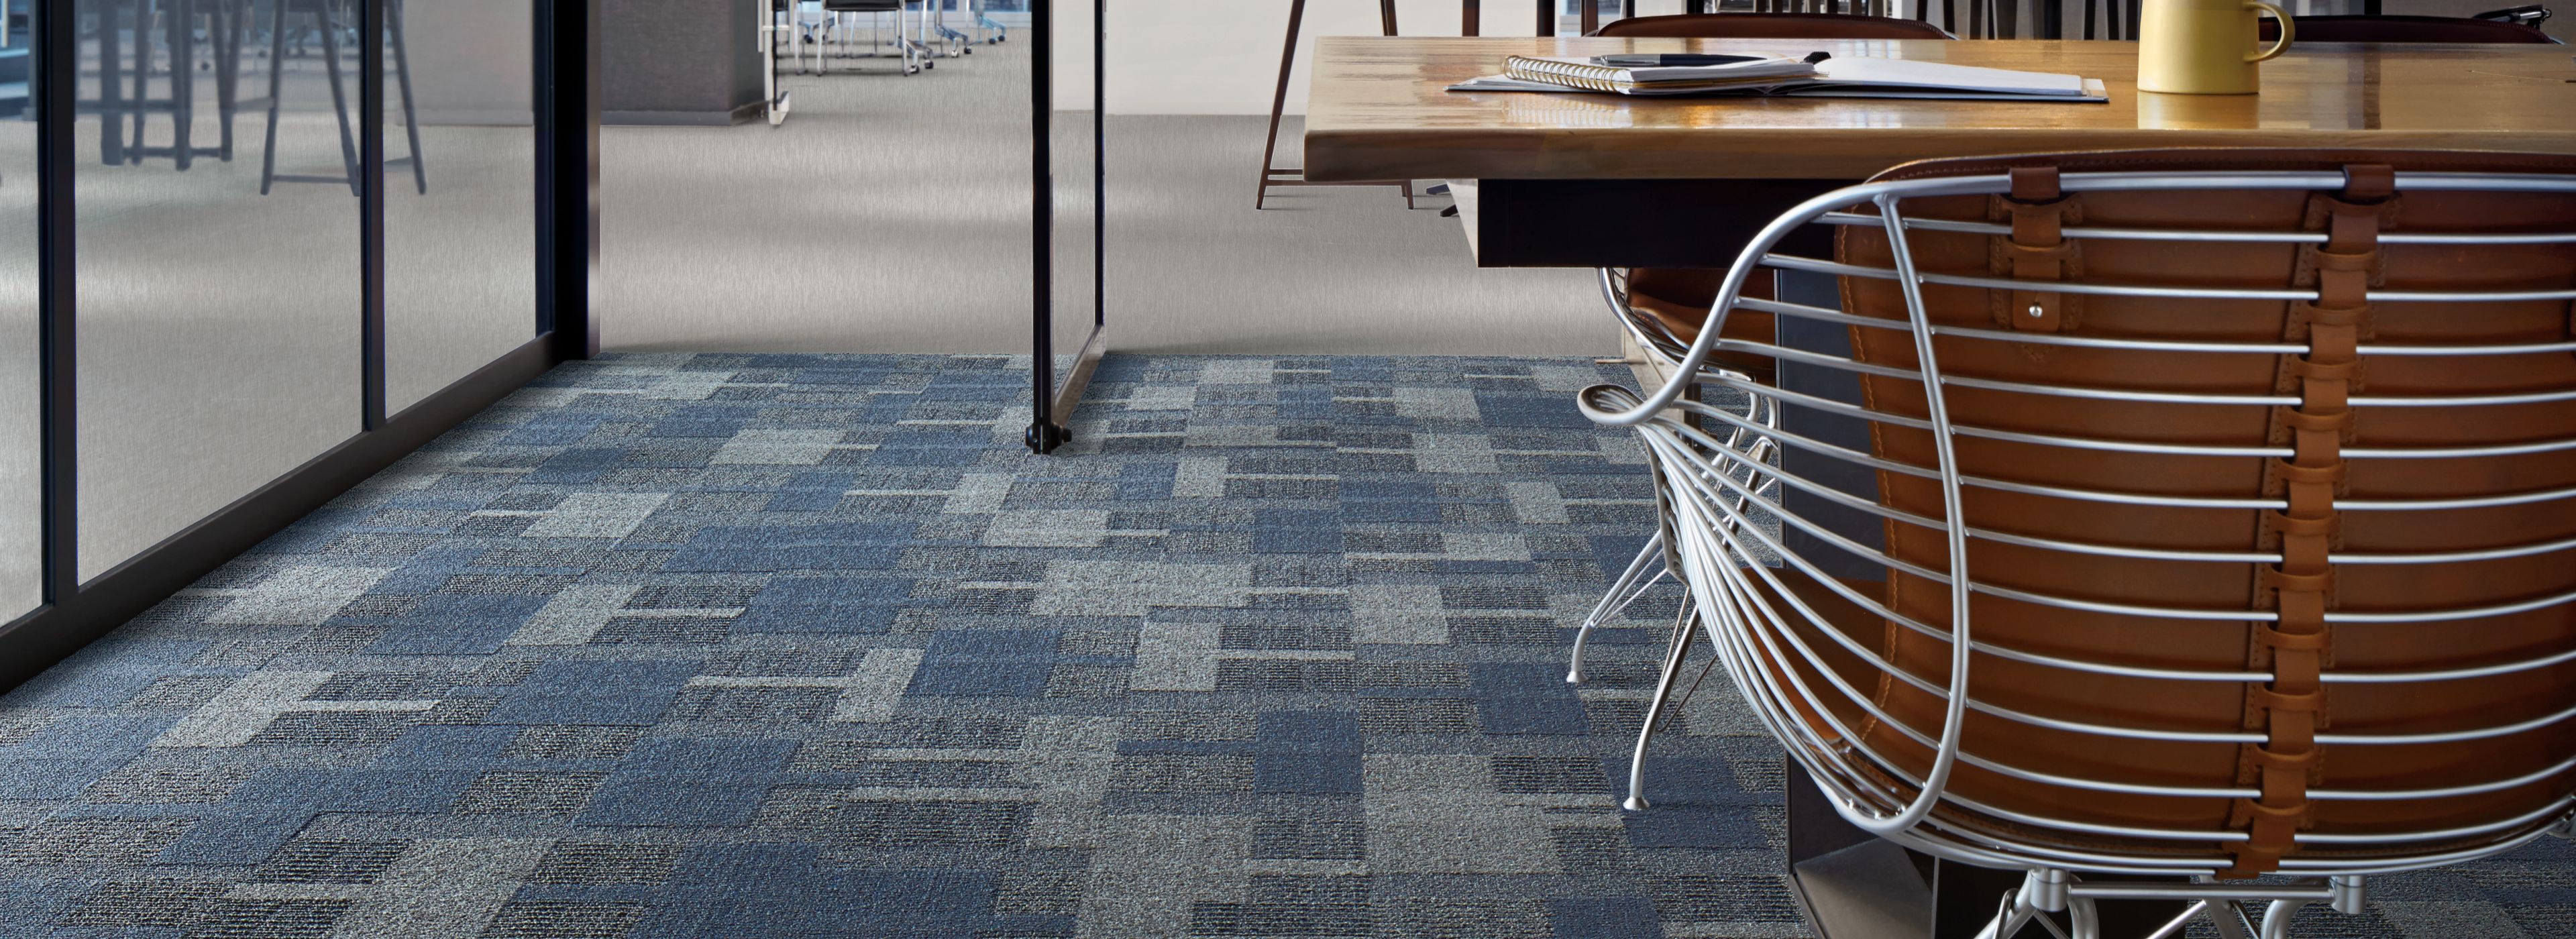 image Interface Geisha Gather plank carpet tile and Brushed Lines LVT in meeting room numéro 1